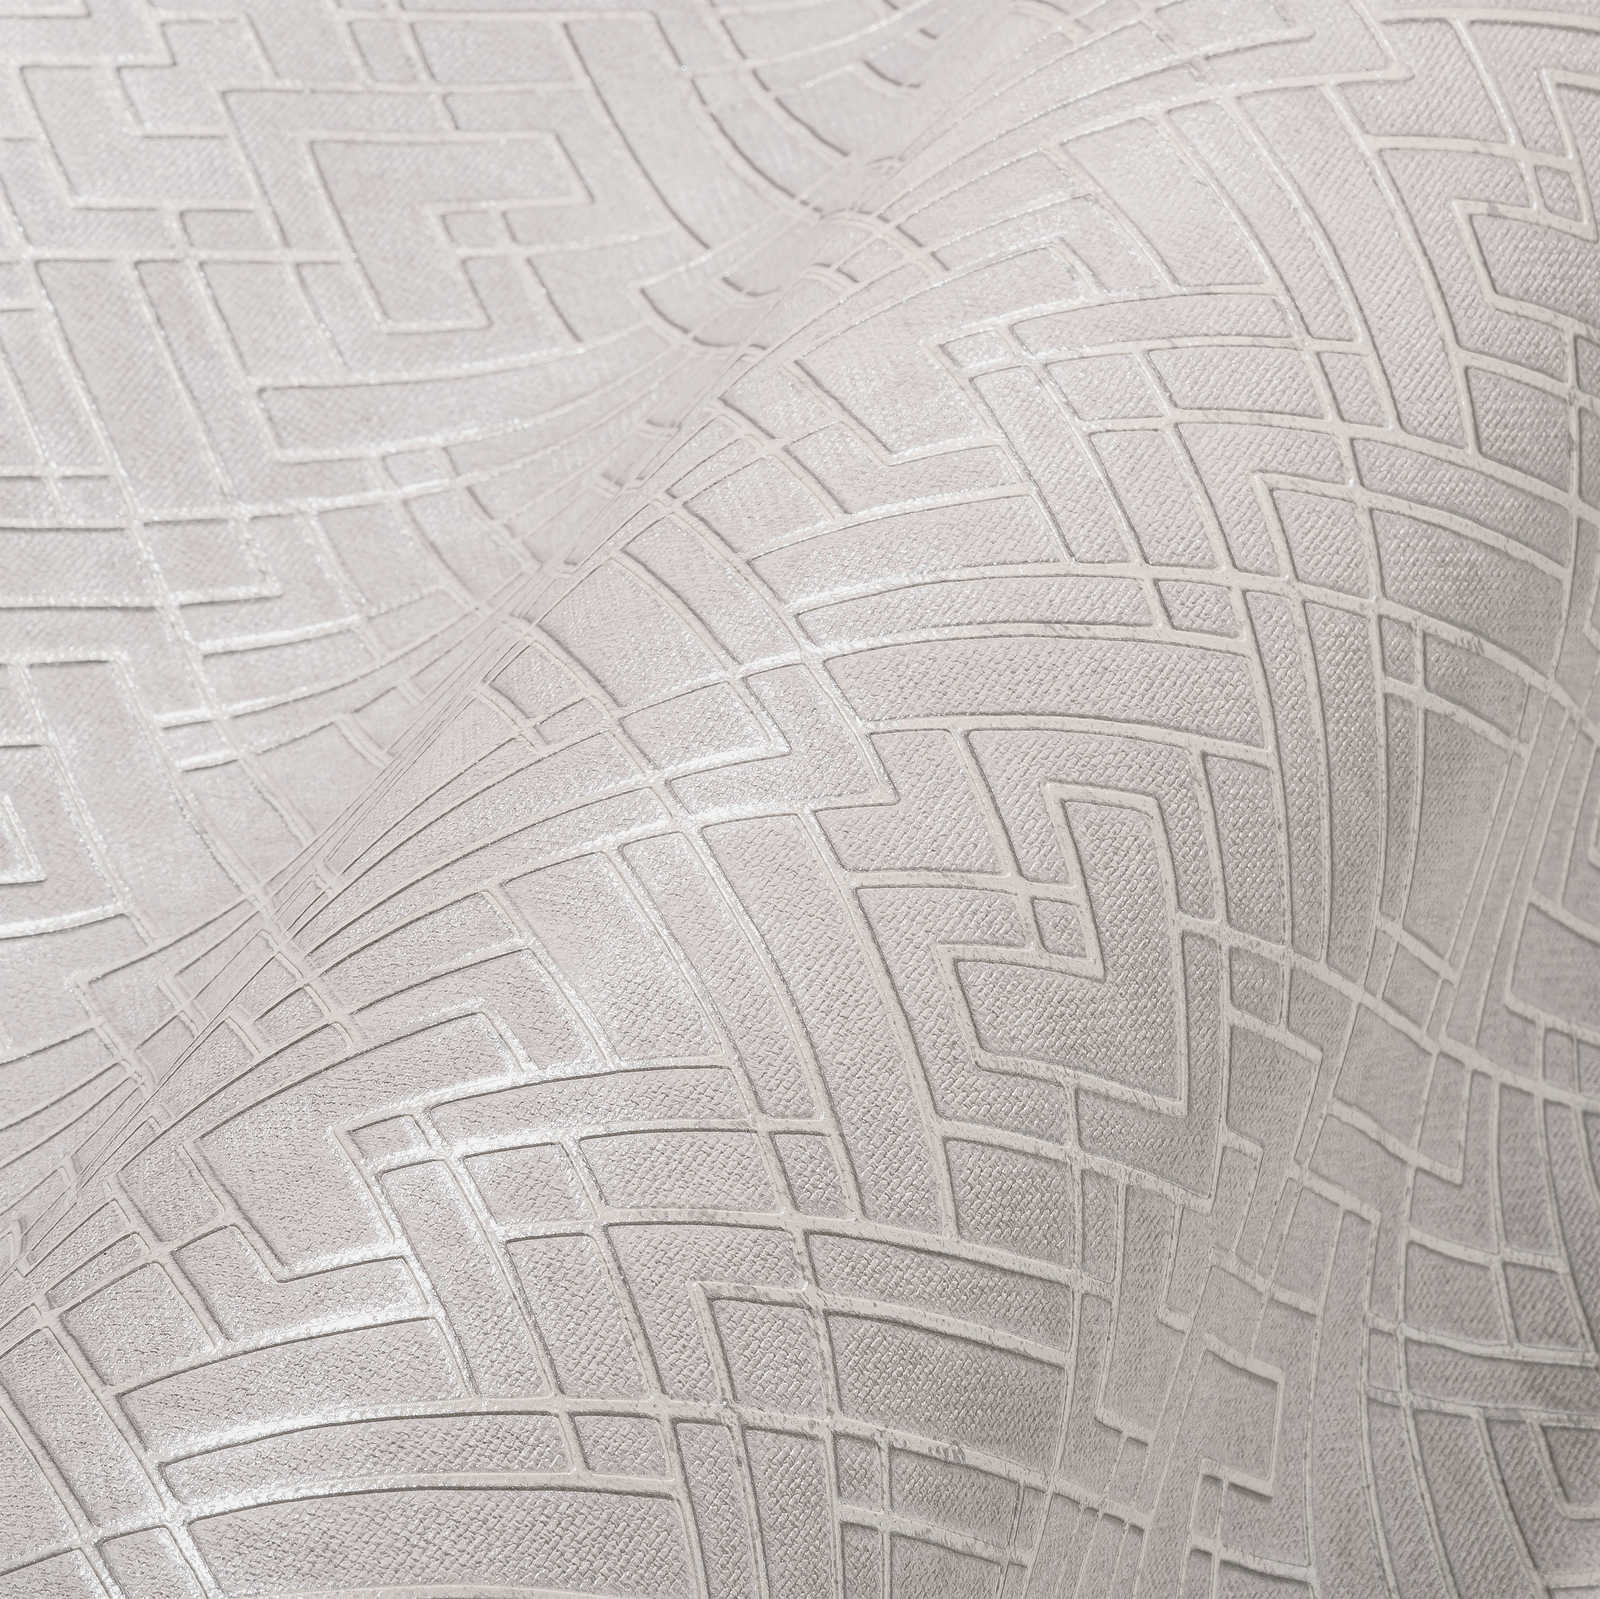             Silver wallpaper with metallic lines graphic - grey
        